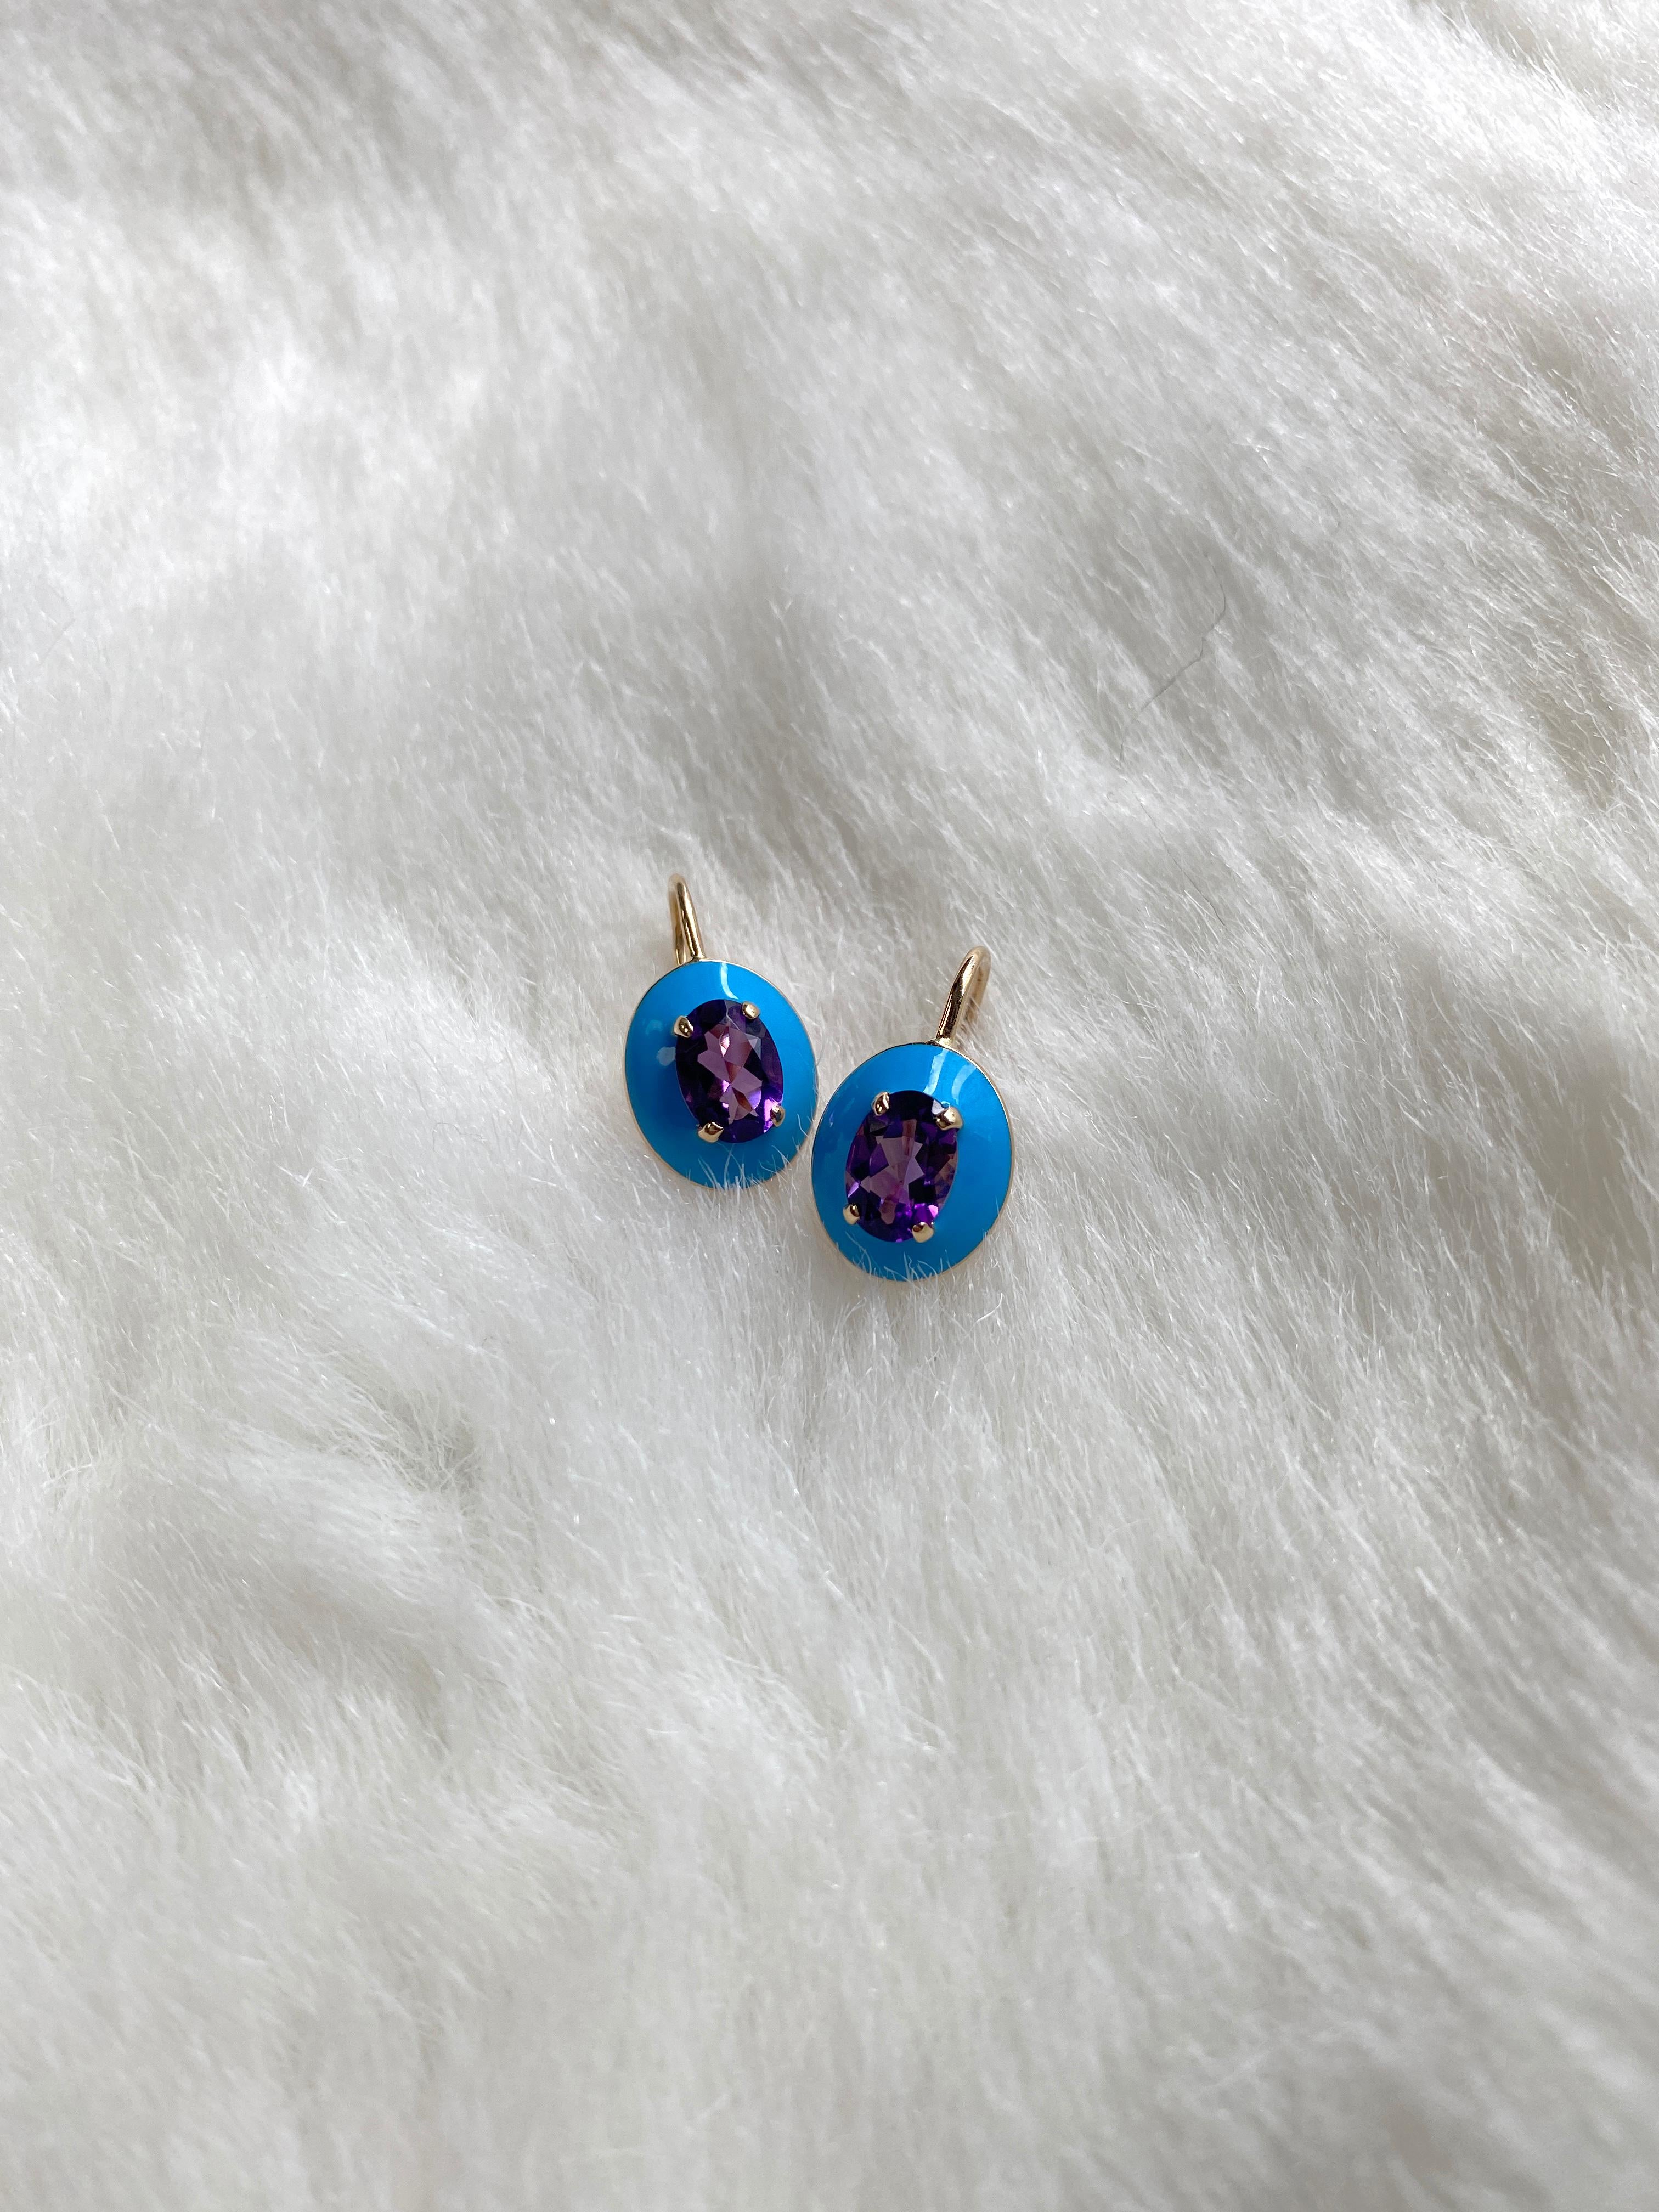 These unique earrings are a Faceted Oval Amethyst, with Turquoise Enamel border and Lever back. From our ‘Queen’ Collection, it was inspired by royalty, but with a modern twist. The combination of enamel, and Amethyst represents power, richness and